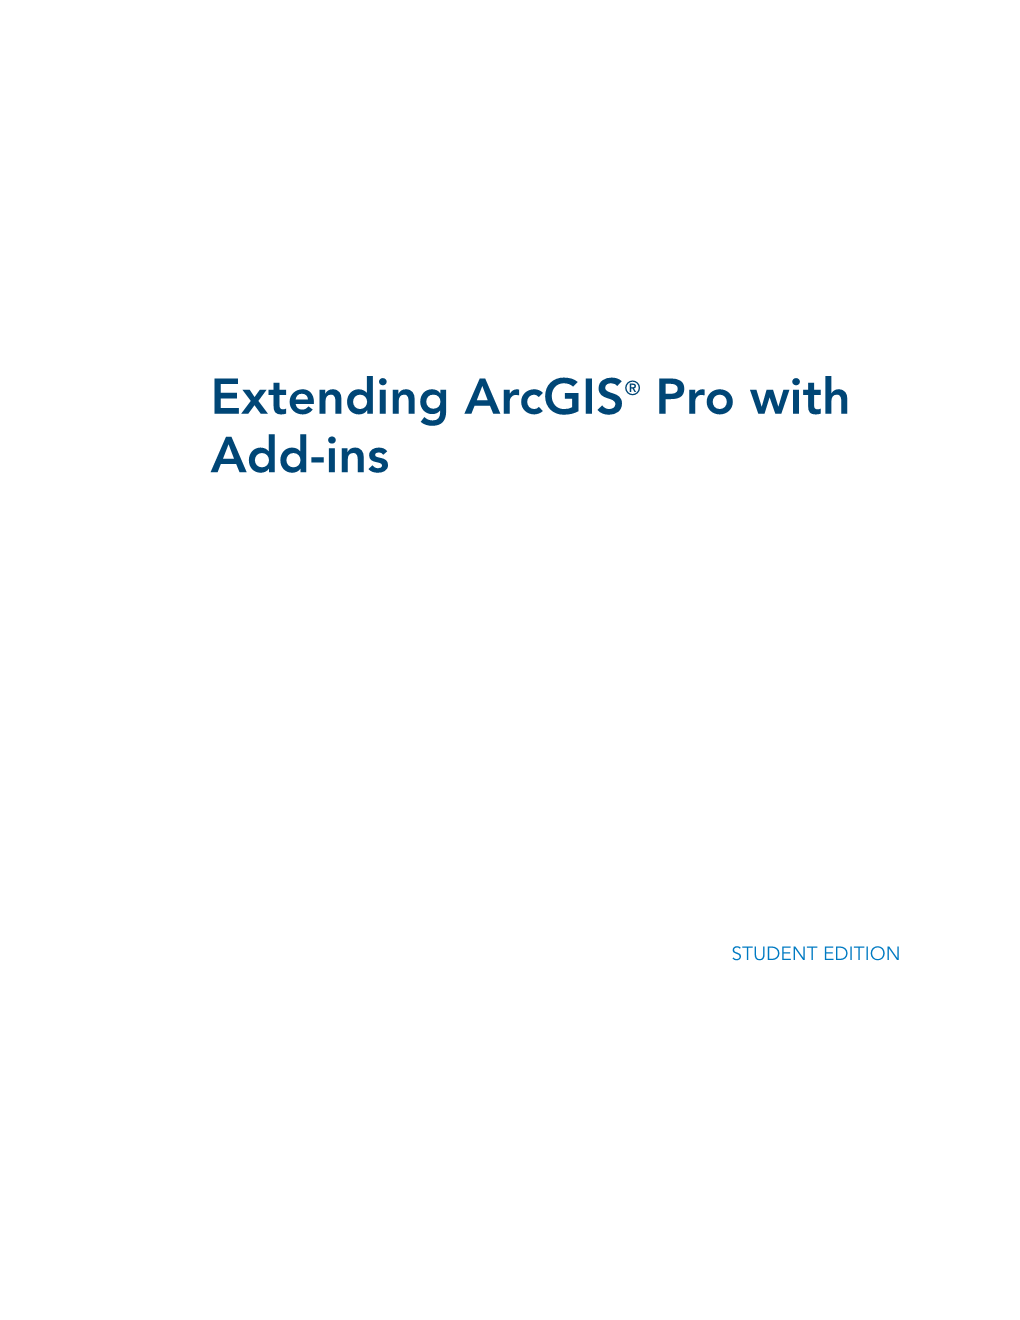 Extending Arcgis Pro with Add-Ins